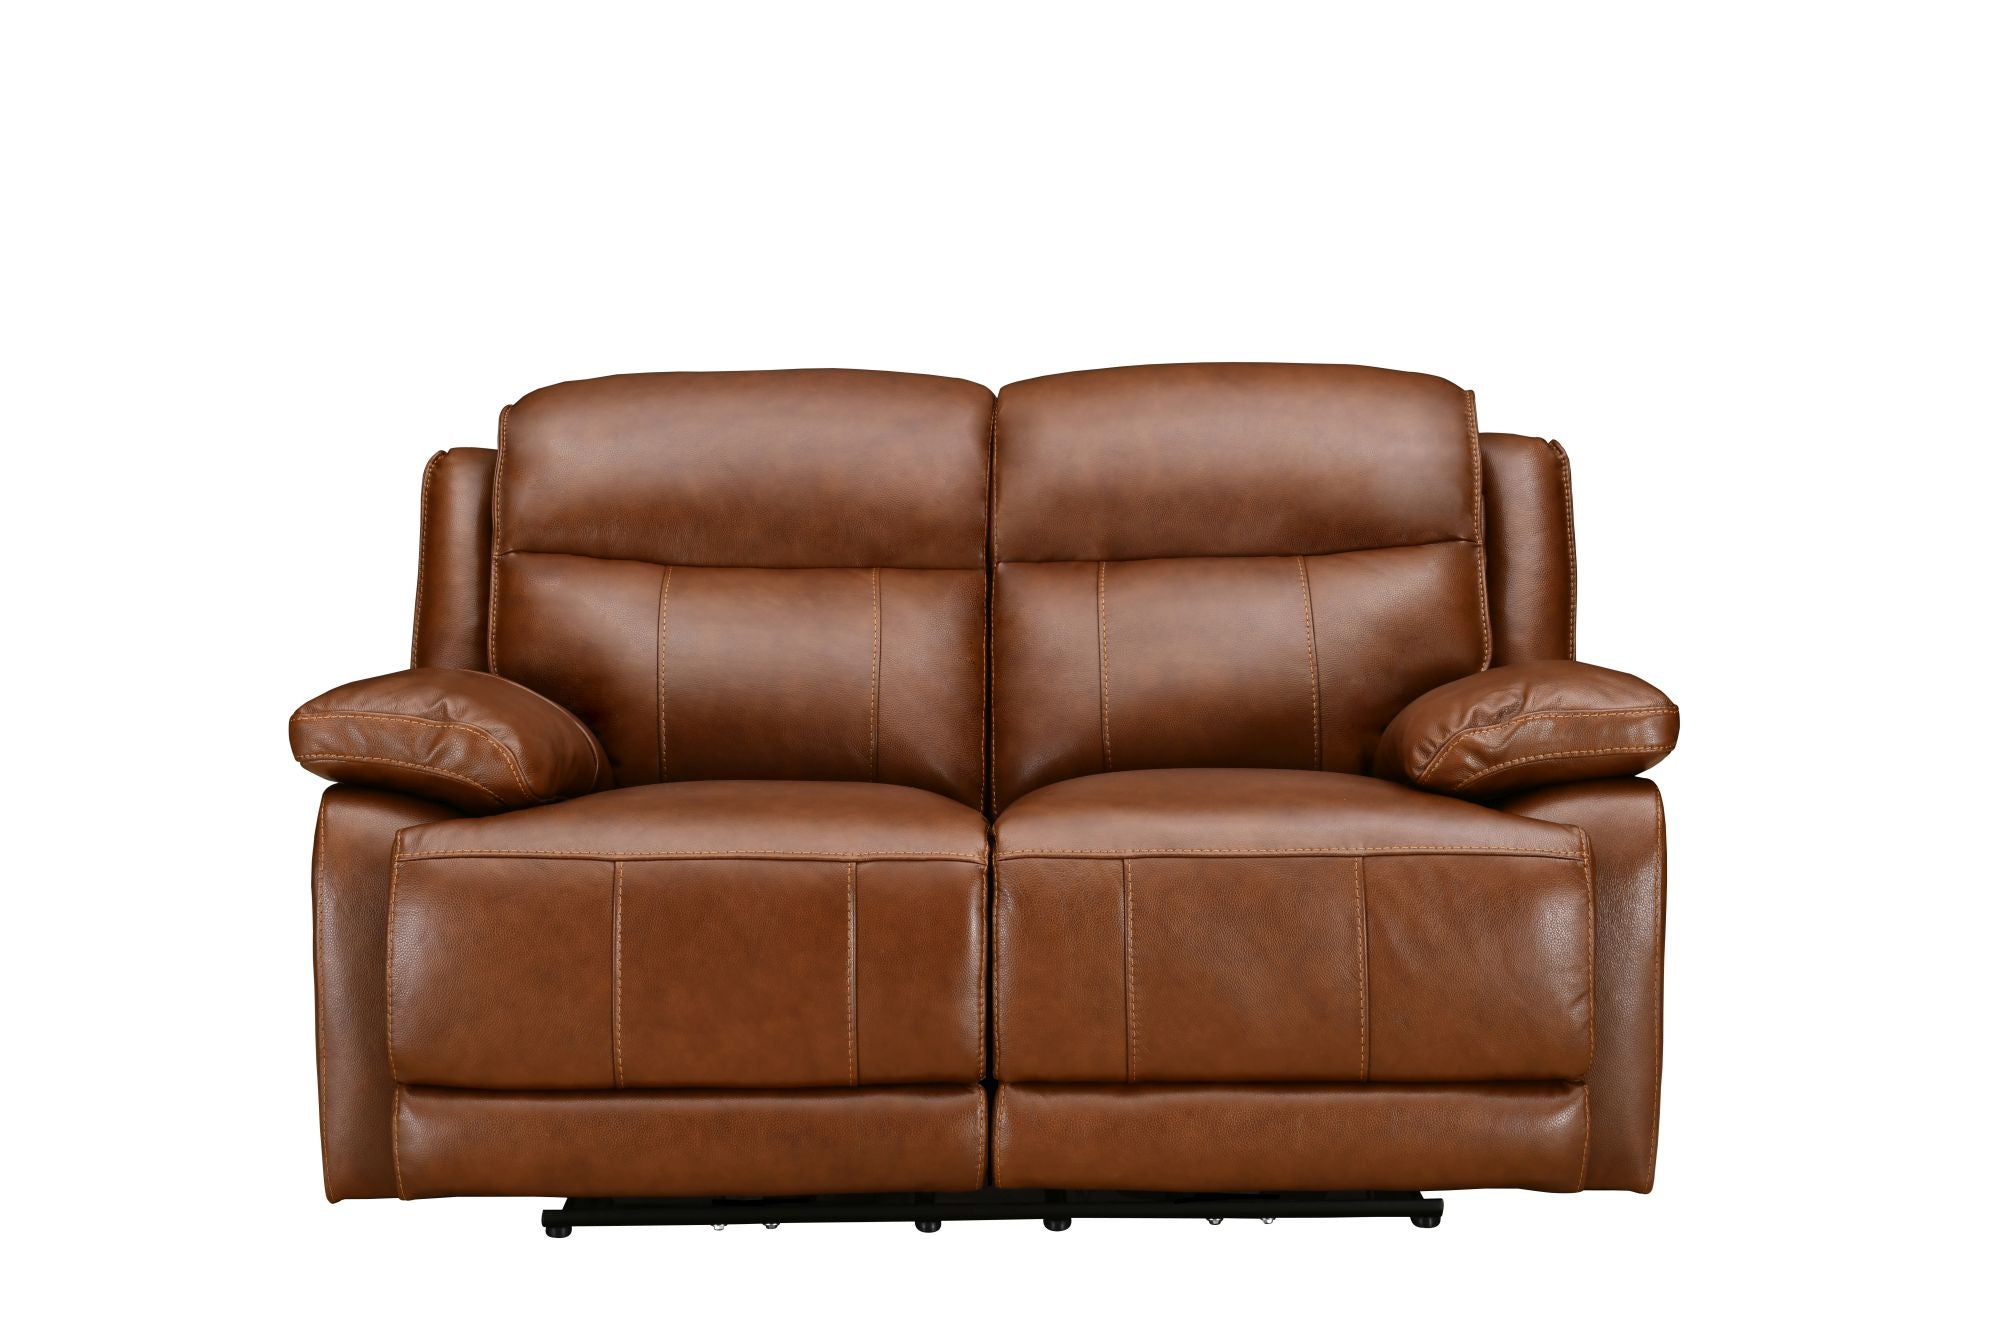 Montana Luxury 2-Seater Leather Sofa with Power Recliner & Adjustable Headrest - Contemporary Comfort